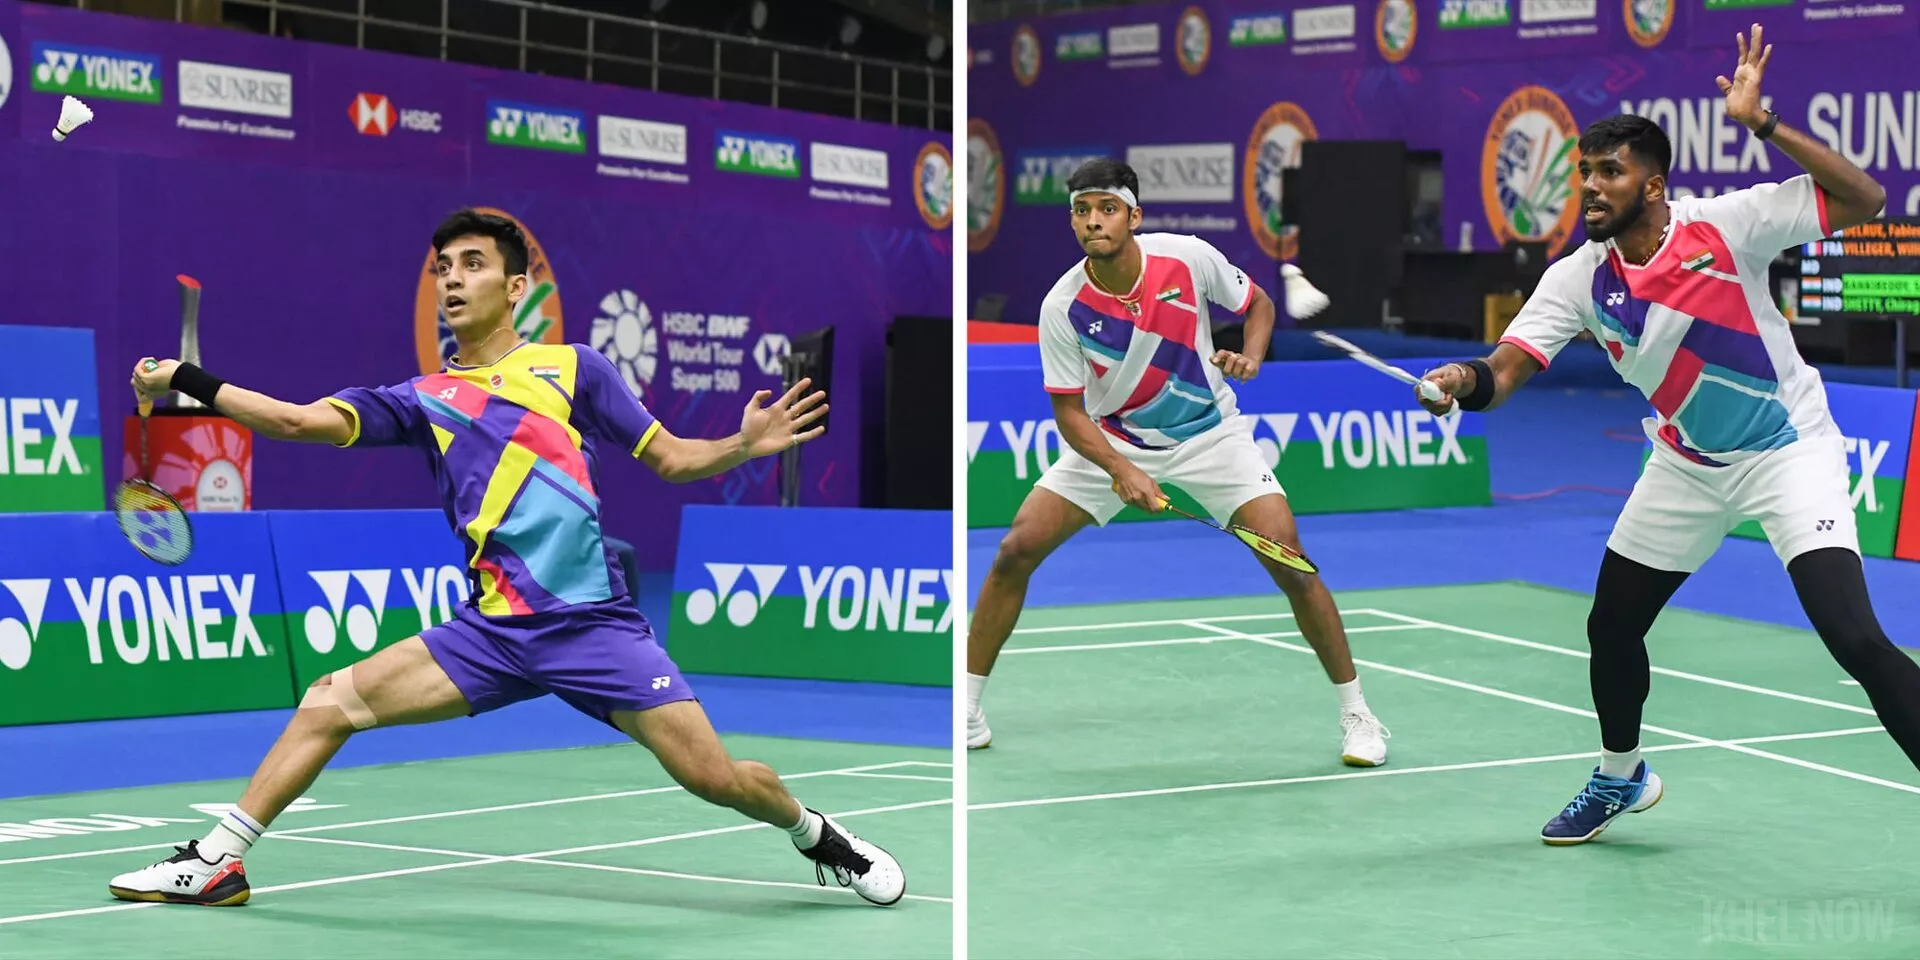 On the final day of India Open 2022, Lakshya Sen and the duo of Chirag Shetty-Satwiksairaj Rankireddy look for gold medals.